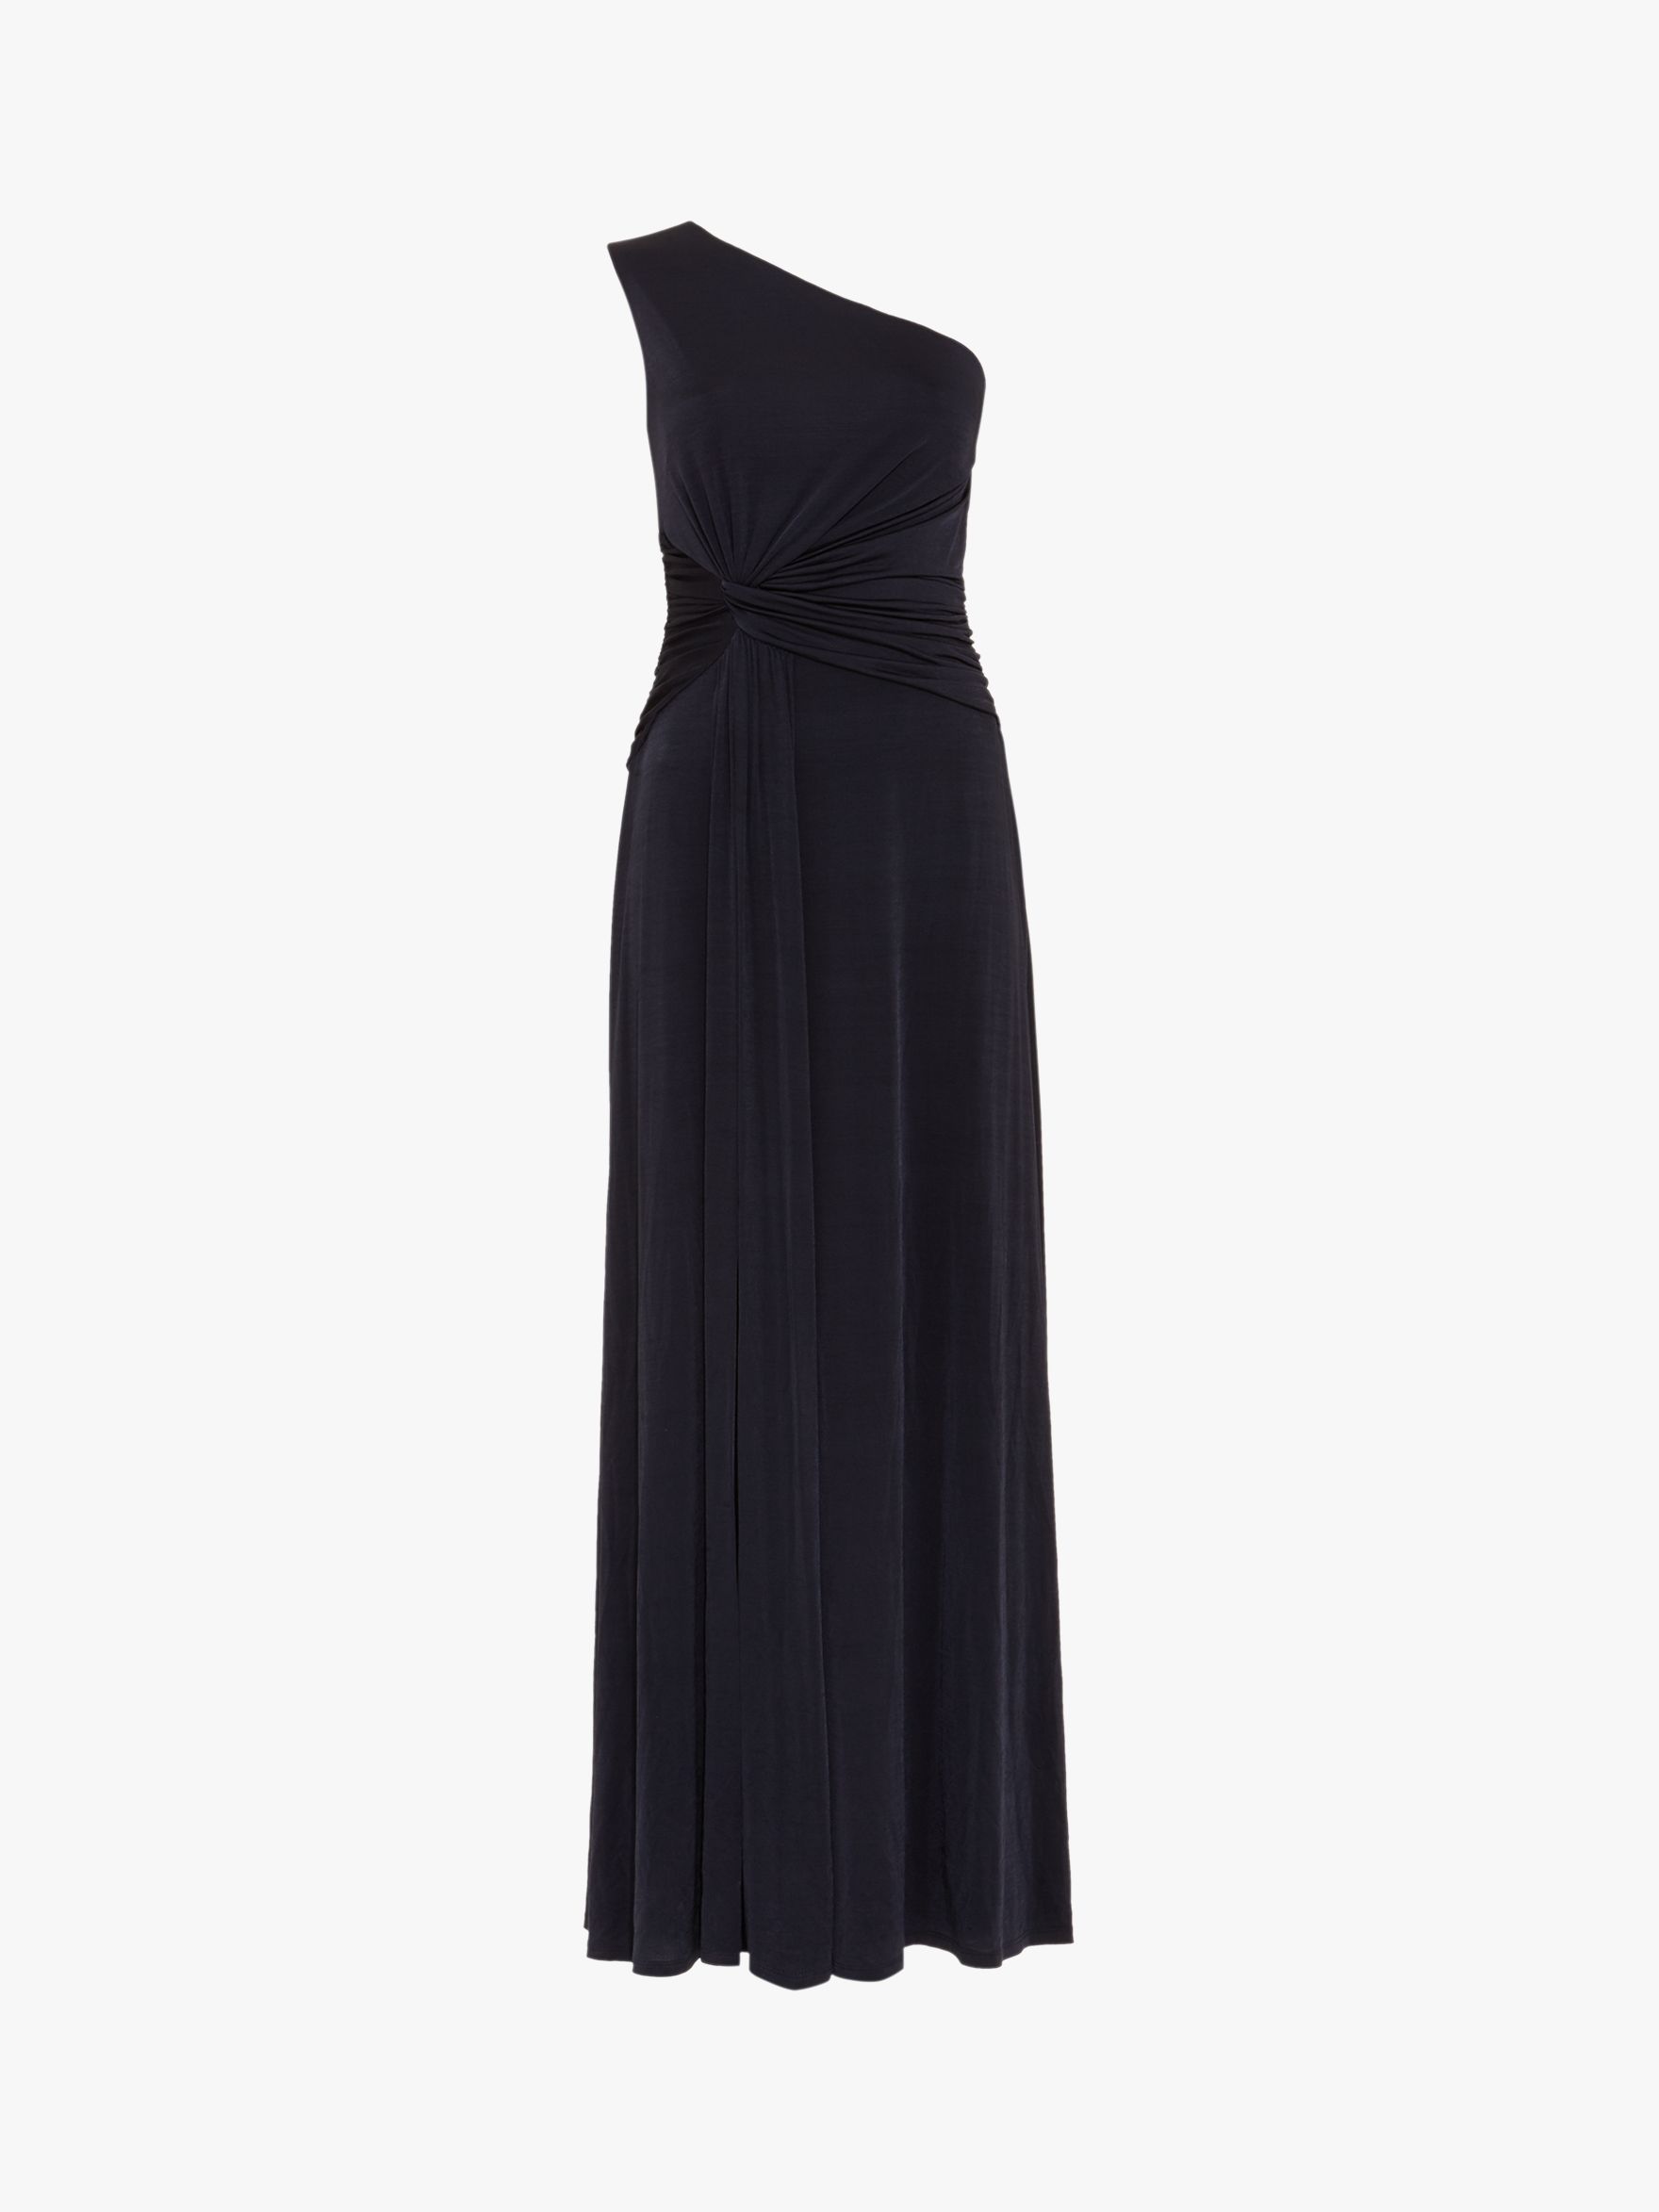 phase eight one shoulder dress